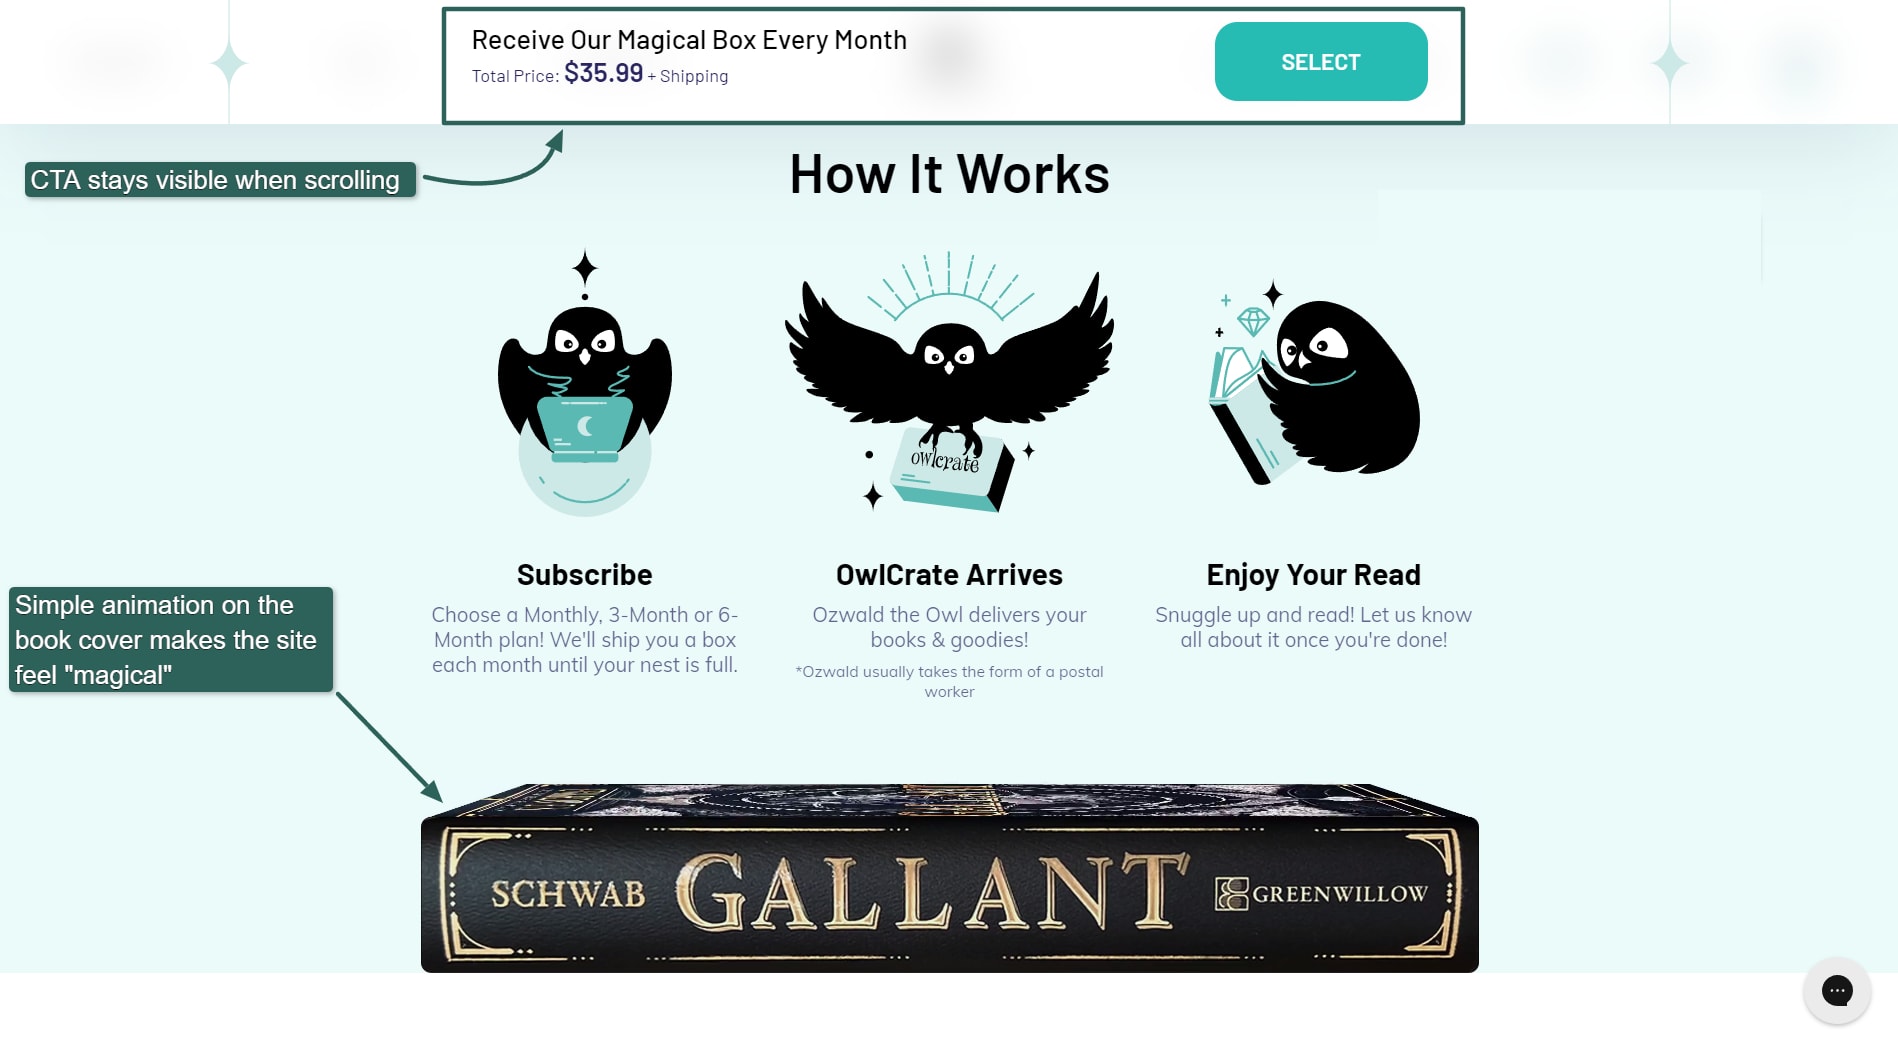 OwlCrate makes extensive use of custom graphics